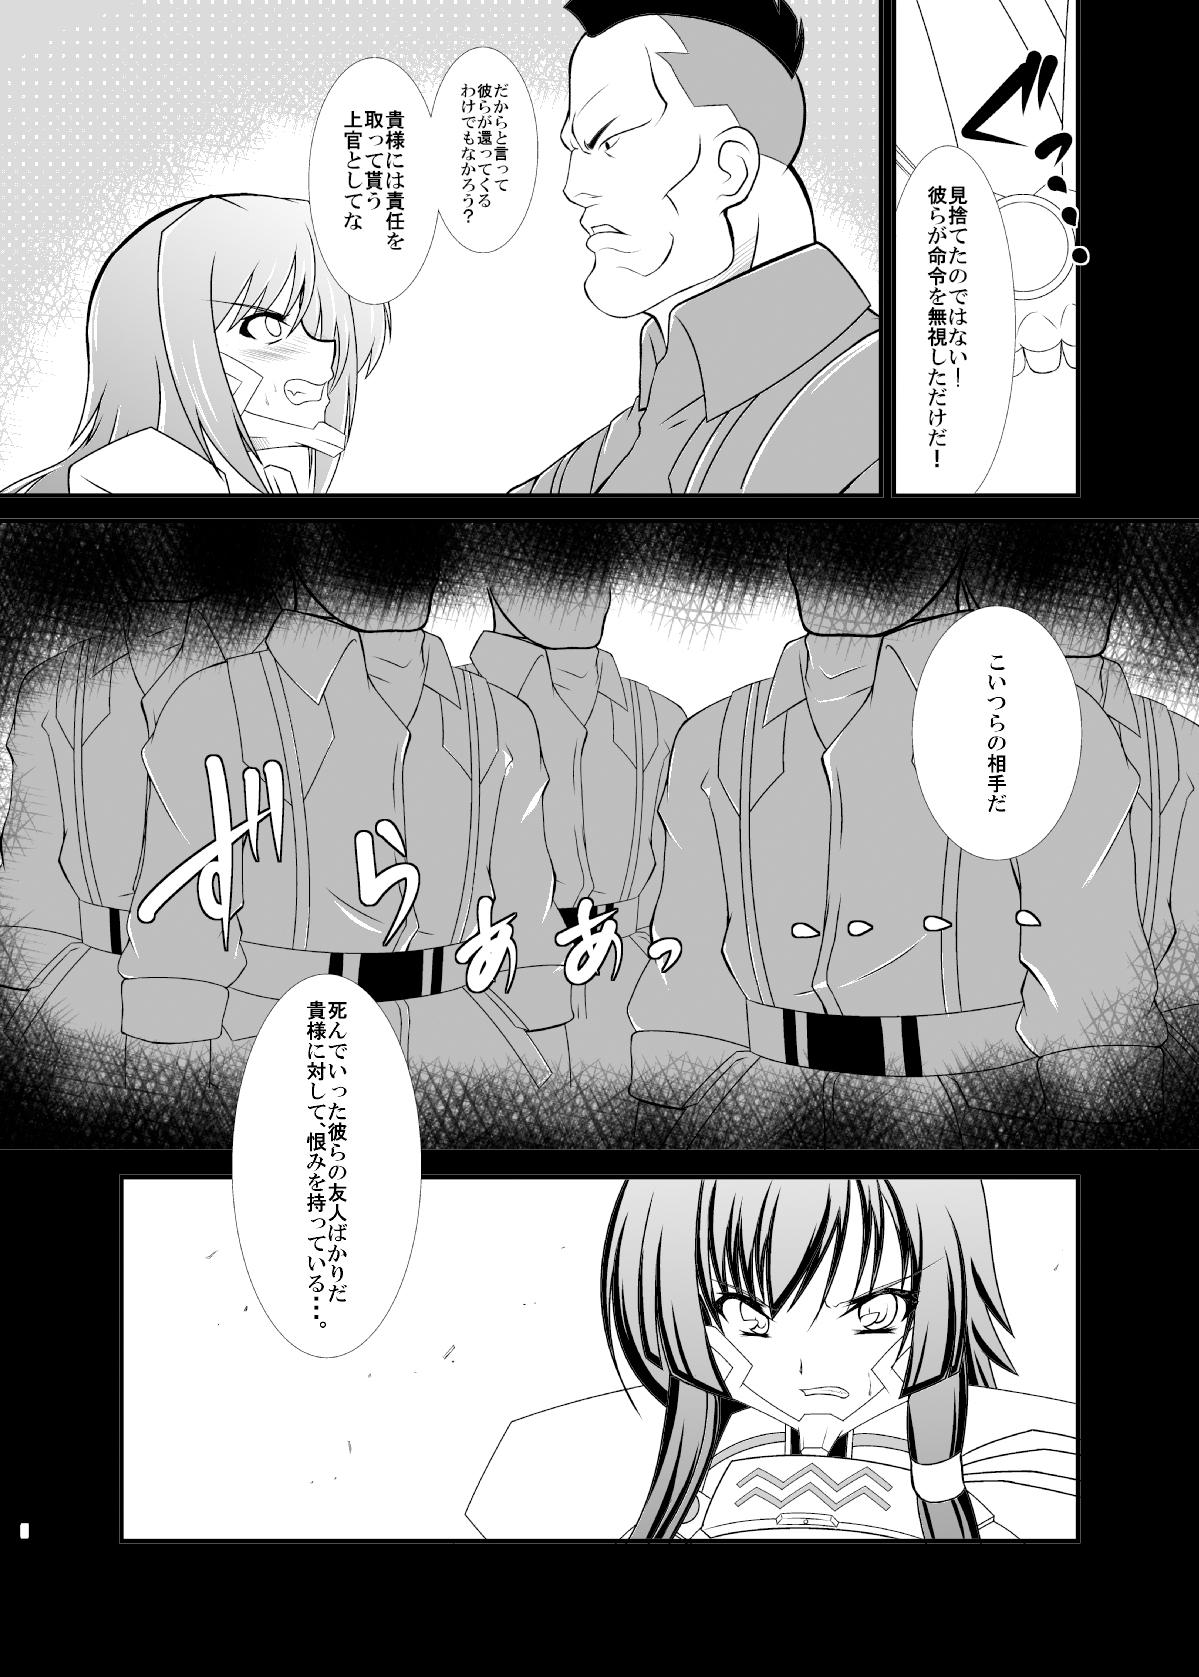 Cock KDT - Muv-luv alternative total eclipse Smalltits - Page 6